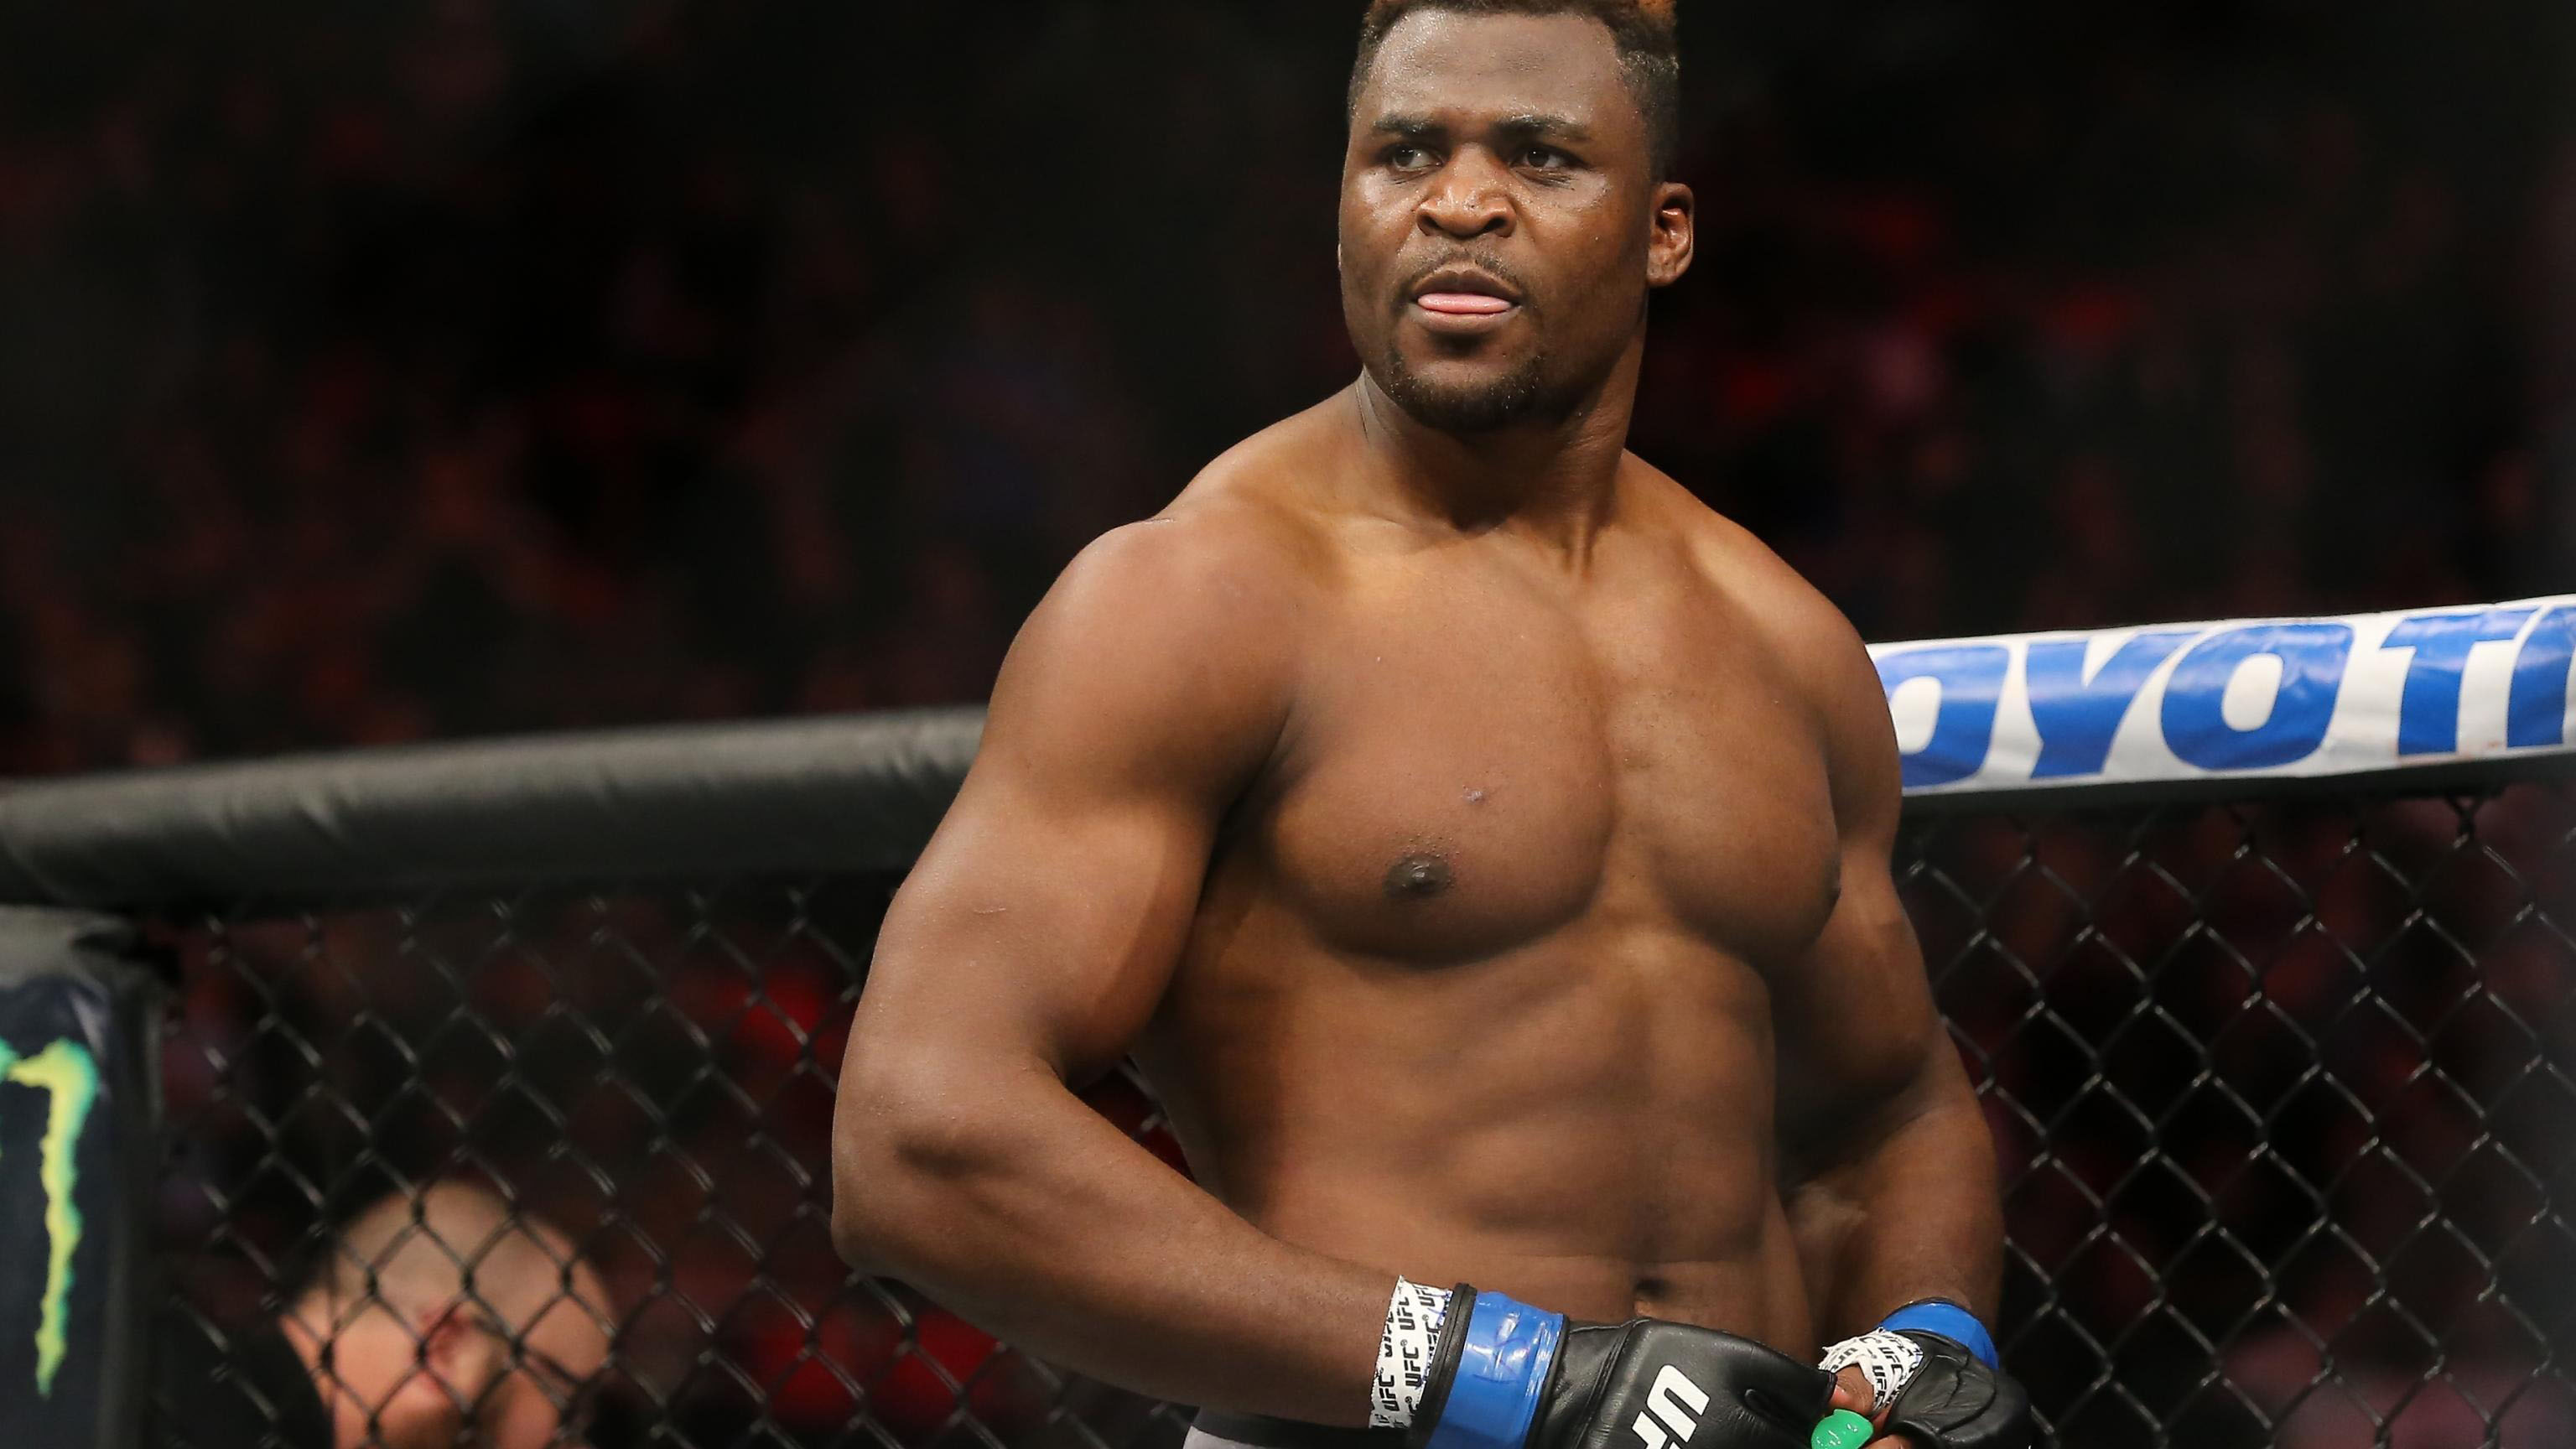 Francis Zavier Ngannou (born 5 September 1986) is a French-Cameroonian mixed martial artist. He currently competes in the Heavyweight division for the...